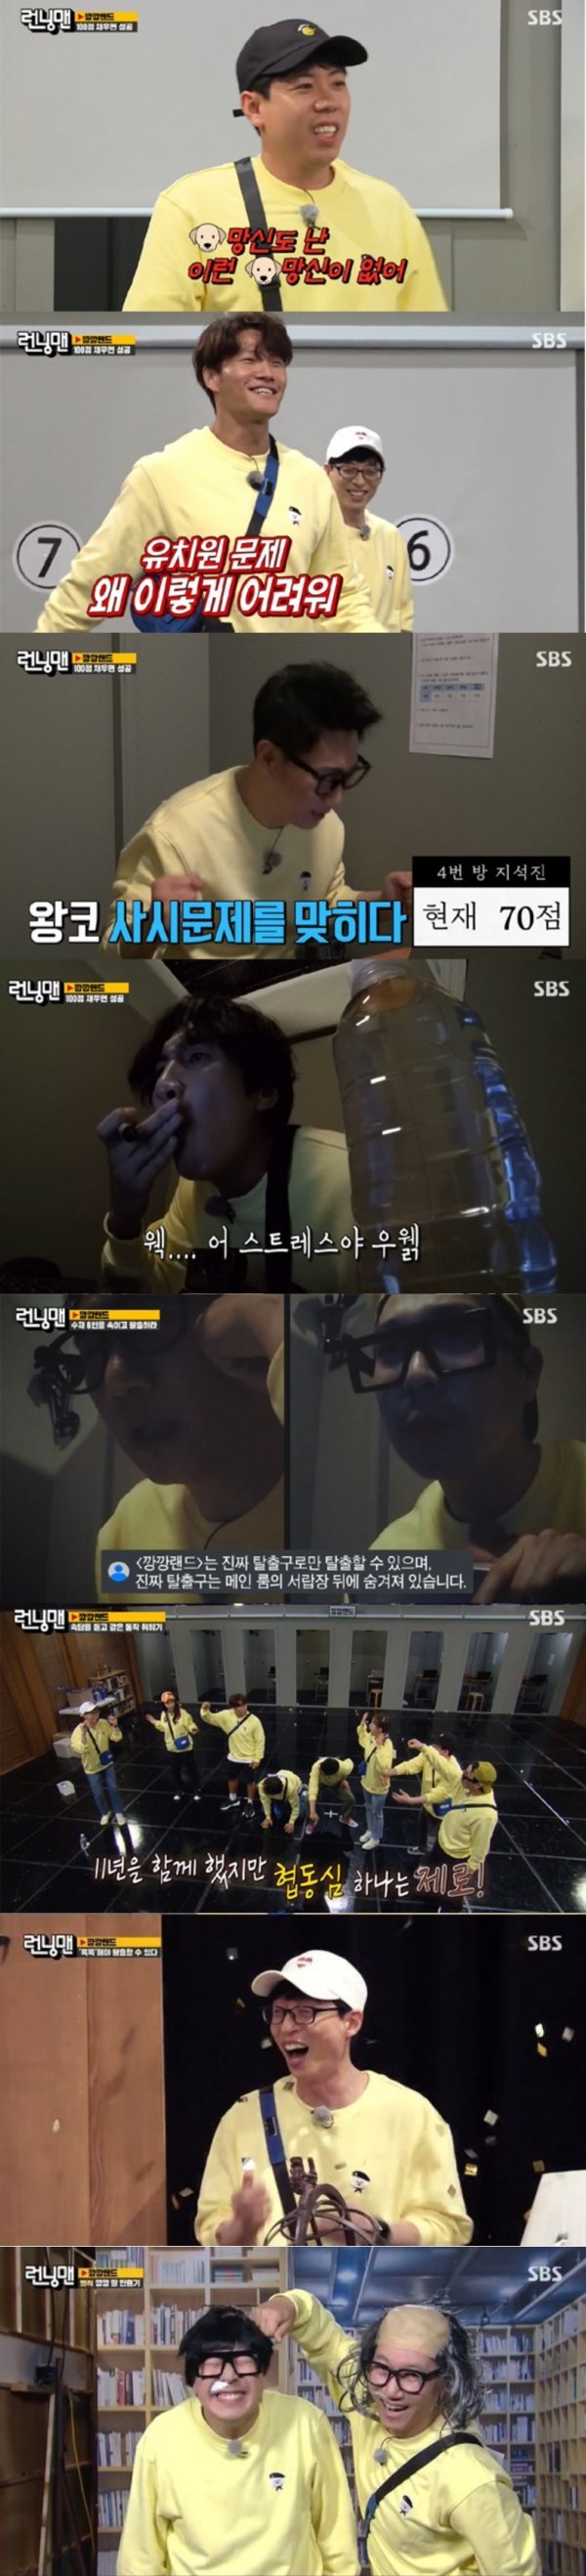 SBS Running Man recorded a big increase in ratings with Land Race, which repeats the Reversal story.Running Man, which aired on the 16th, recorded an average of 4% of SBSs main target 2049 ratings (hereinafter based on Nielsen Korea metropolitan area and households), and kept the top spot in the same time zone, with an average audience rating of 5.4% for the first part and 6.7% for the second part, showing higher ratings than last week.The highest audience rating per minute jumped to 7.8 percent.The broadcast was decorated with the Land race, which can escape smartly, and the members unfamiliar knowledge battle was held.Yoo Jae-Suk and Kim Jong-guk took first and second place side by side, with all members who challenged to solve the problem of judicial notice level from Yoo Ji-won in the confined room appealing for Knowledge Pain.Haha and Ji Suk-jin formed the bottom seven and eight respectively.The first and sixth members of the group had to use two Susanna Reid members to get a room, and within six hours they could find the escape password and escape to get a prize money of 3 million won.Susanna Reid team was eager to find the password, but there was a Reversal story for the blunt team Haha and Ji Suk-jin.The Dunjae team was also secretly conducting a quiz mission, and Susanna Reid X Dunjae team entered the secret number war regardless of you.At this time, Yoo Jae-Suk made a smart knock in front of the escape, confirming that each paper attached by the production team was underlined by Land that can escape smartly.The door to the closed exit opened, and the celebration burst, signaling the winning moment of the Susanna Reid team: the exodus of the unexpected Reversal story.After the victory of Susanna Reid team, Haha and Ji Suk-jin were finally penalized and started to make 2021 NEW Tick to Kick Yang Se-chan.The scene recorded the highest audience rating of 7.8% per minute, accounting for the best one minute.